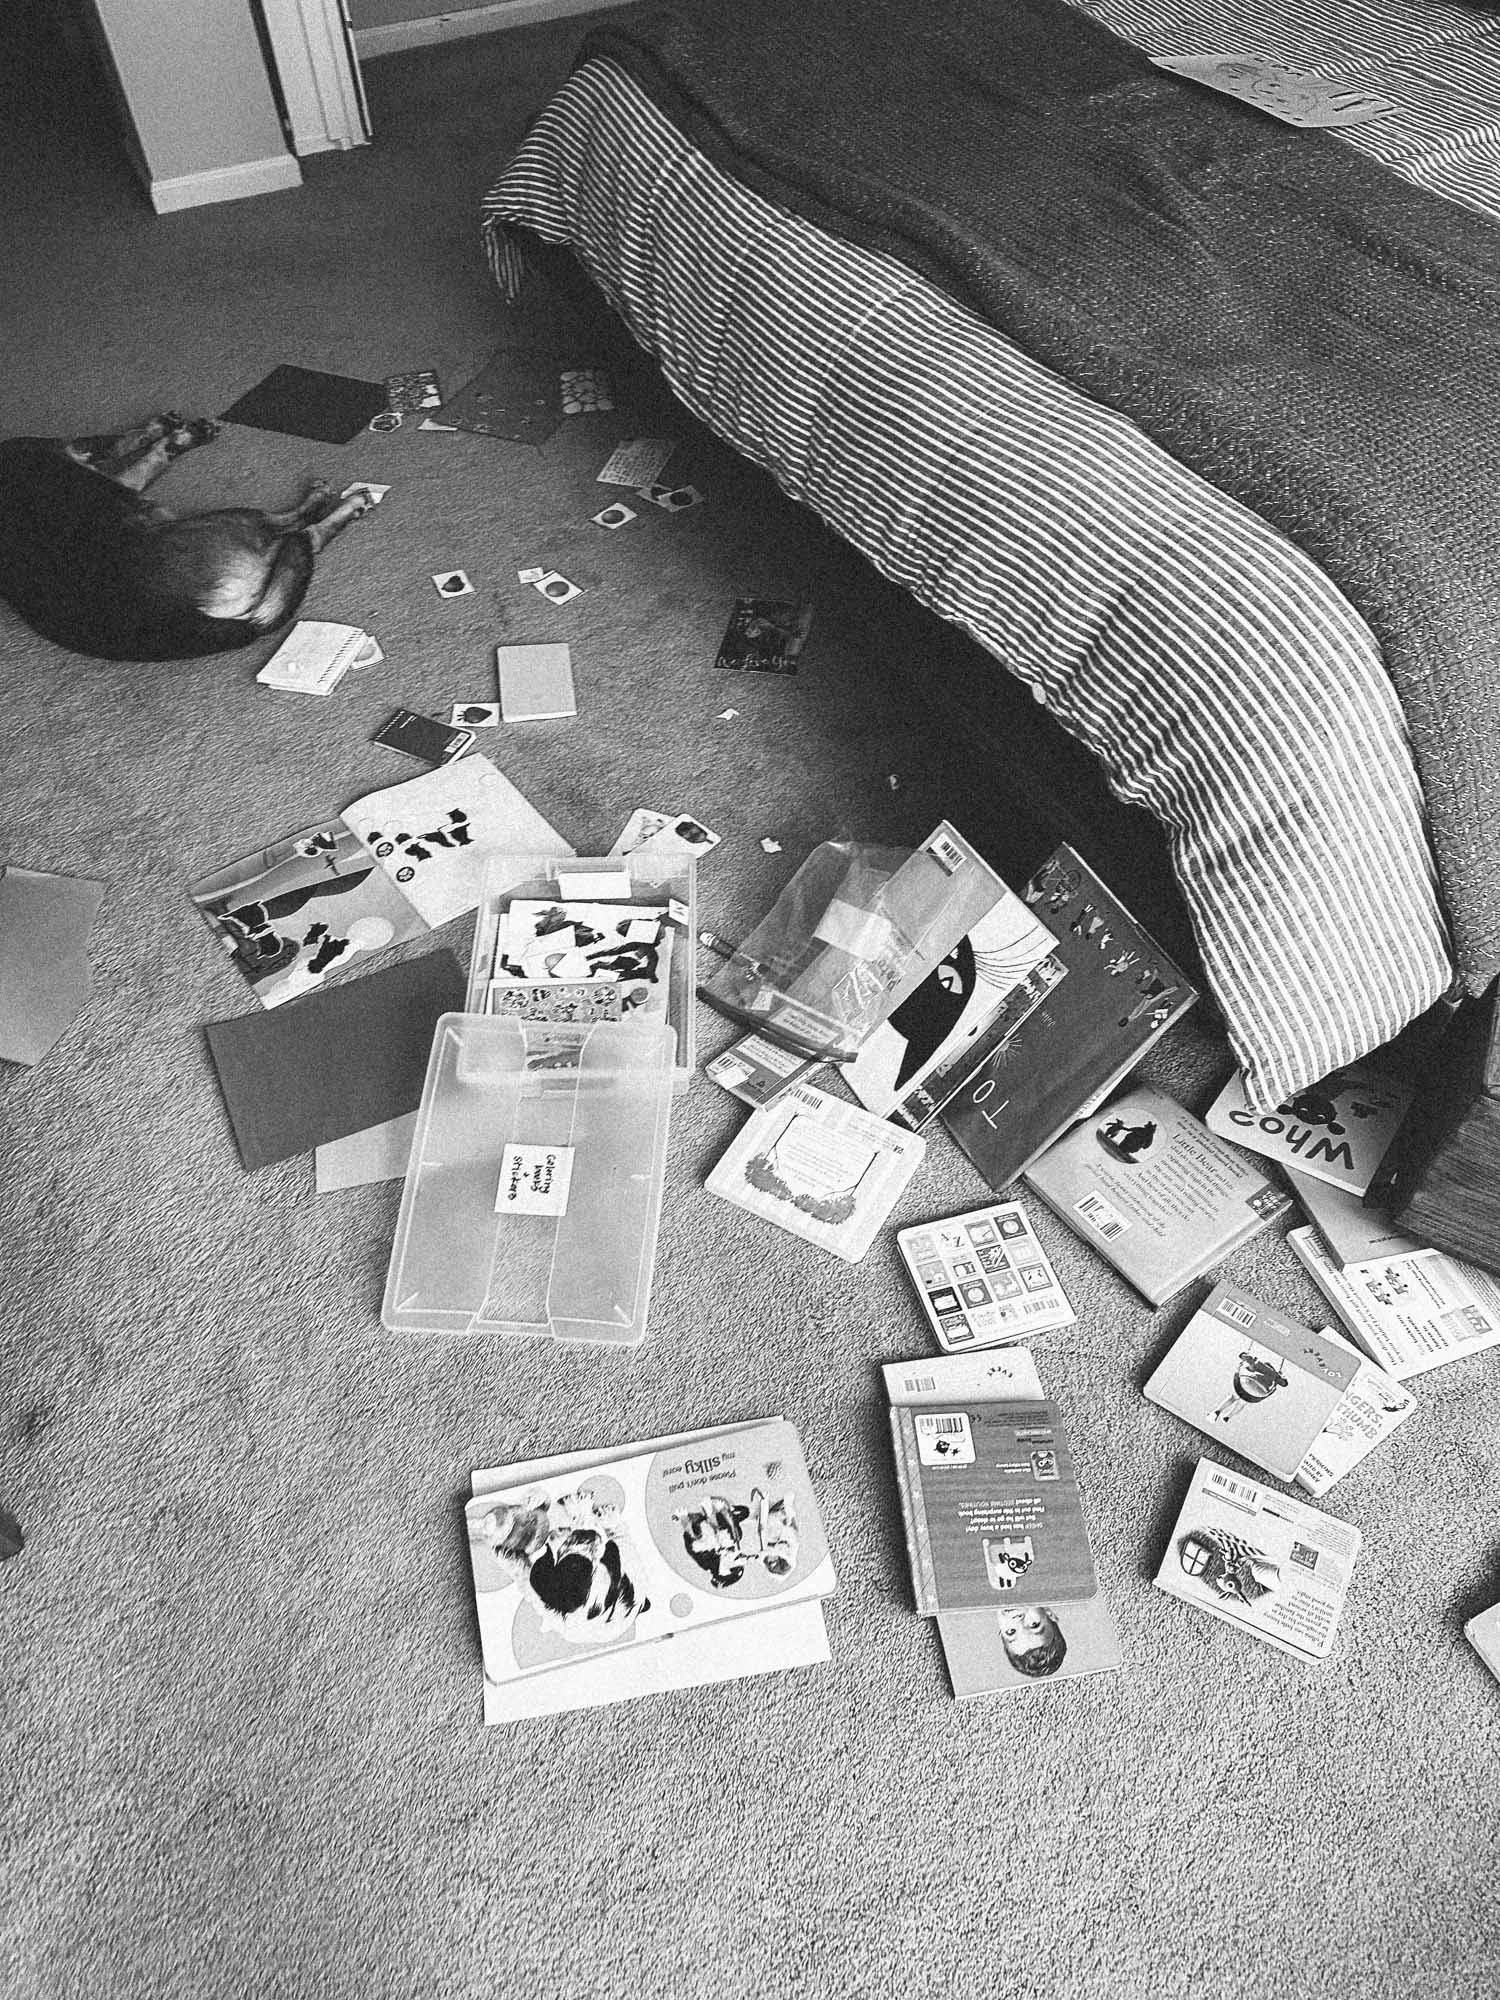 Black and white photo of stuff on the floor in a bedroom